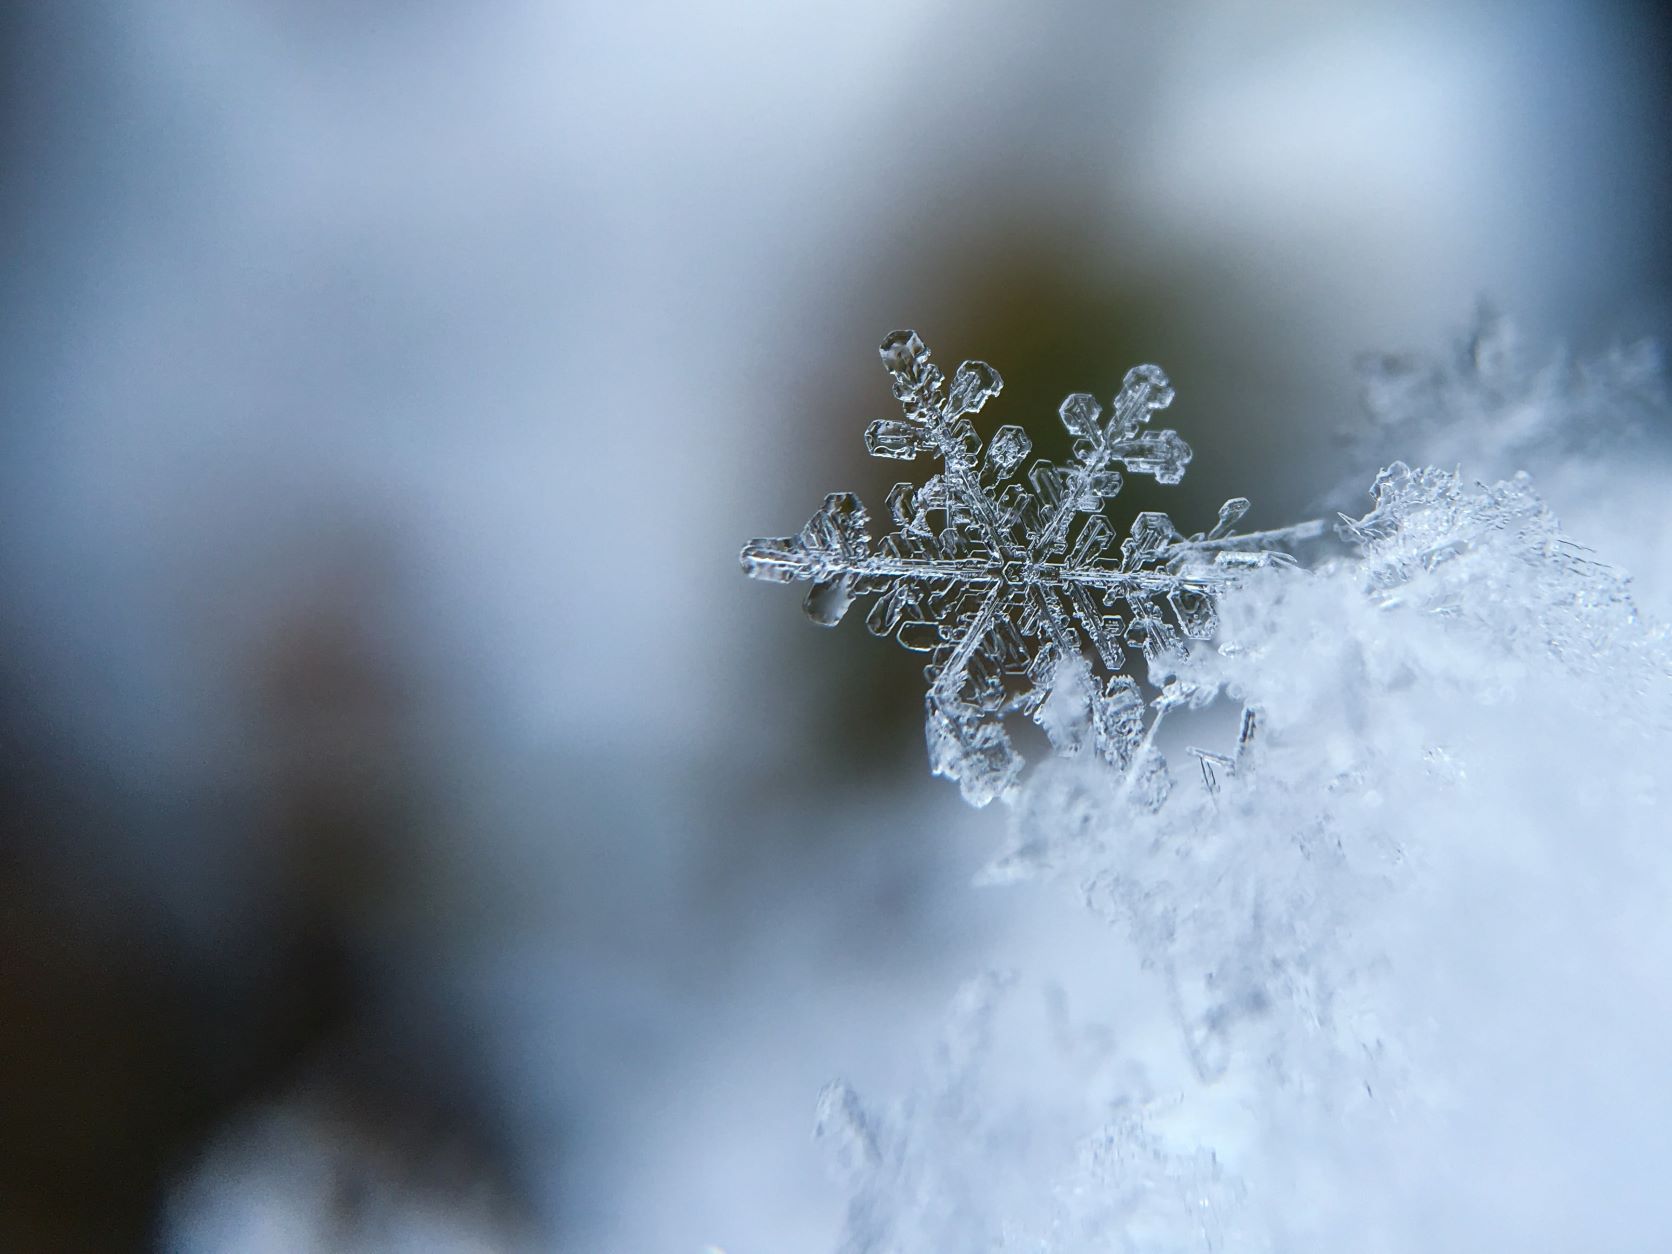 Close-up snowflake on a blurred background. By Aaron Burden for Unsplash.